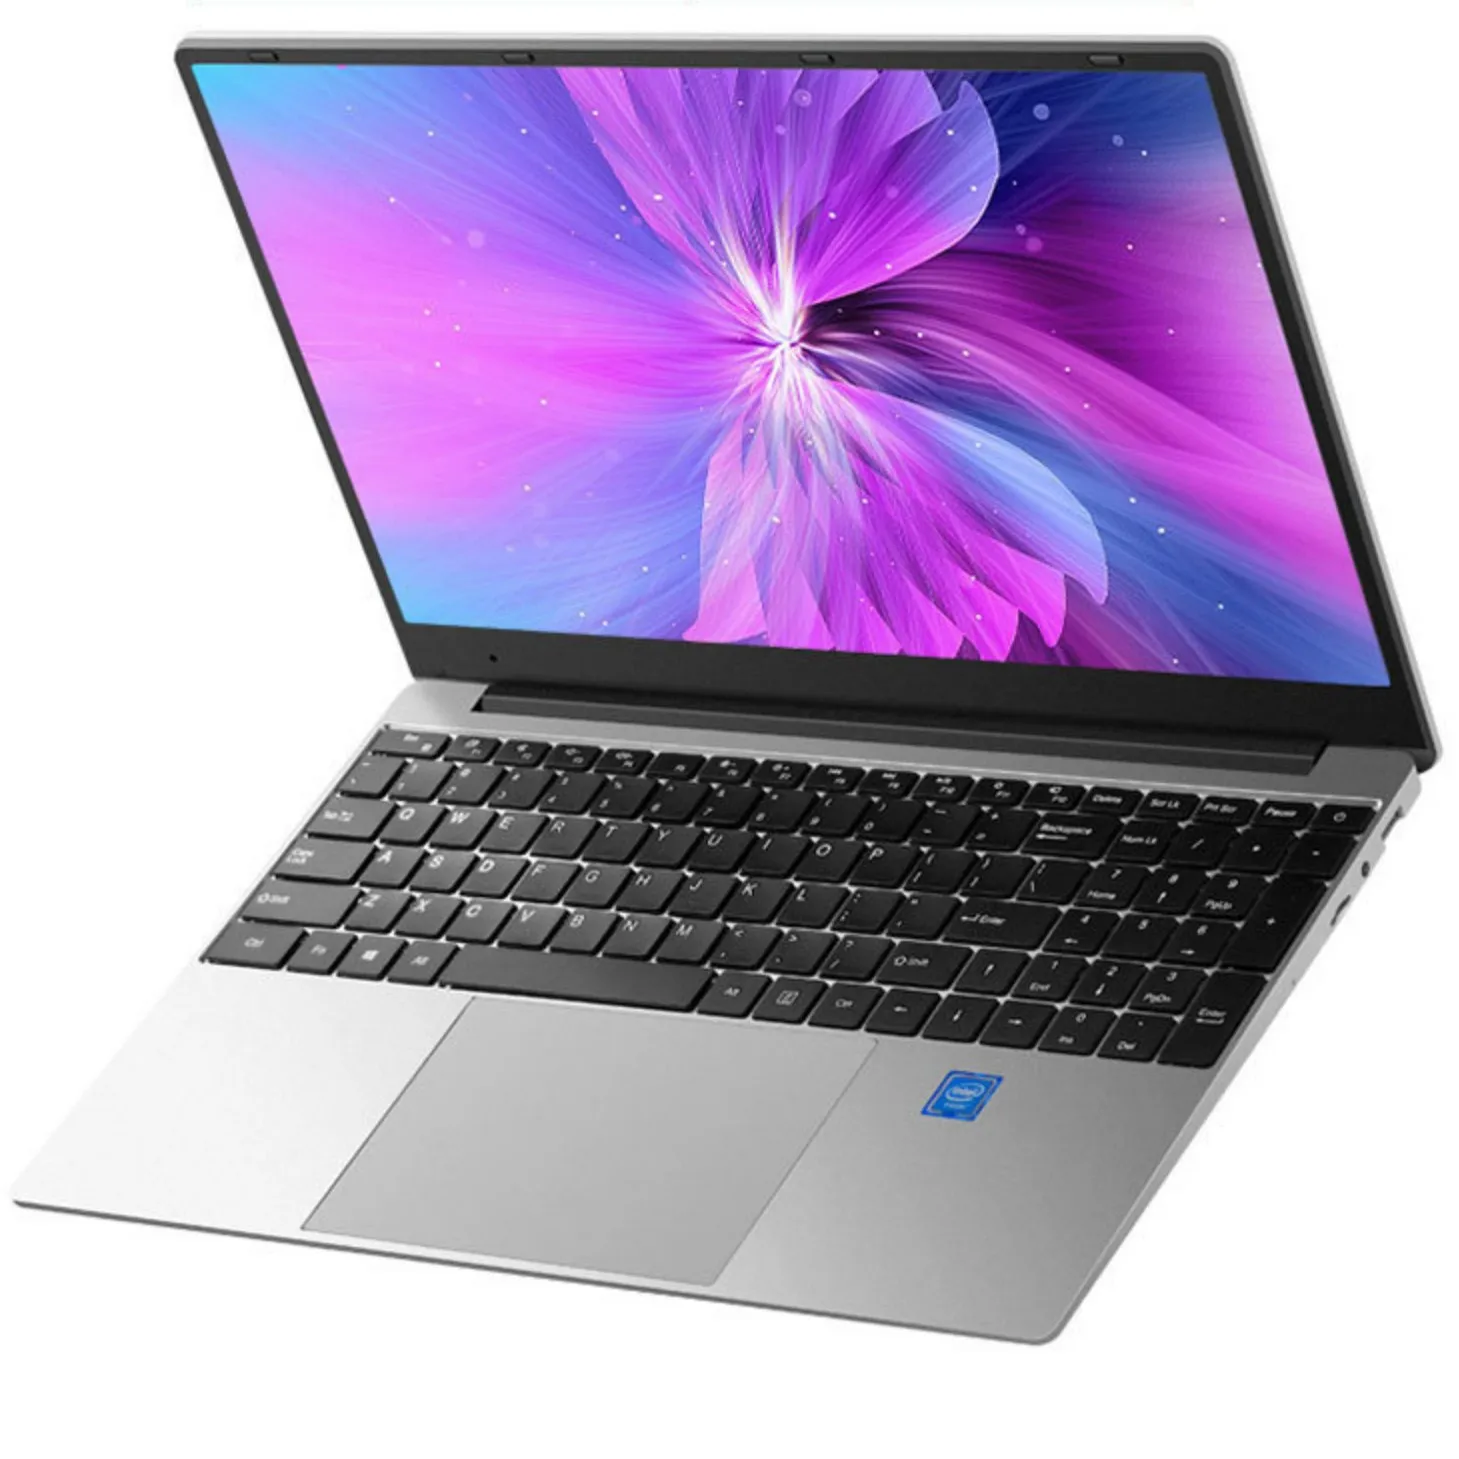 

New Cheap I5 Computer I5 Laptop 15.6 Inch Laptop Ddr4 8g Ram 256g Ssd 6th Generation Core 6267u Win10 For Business